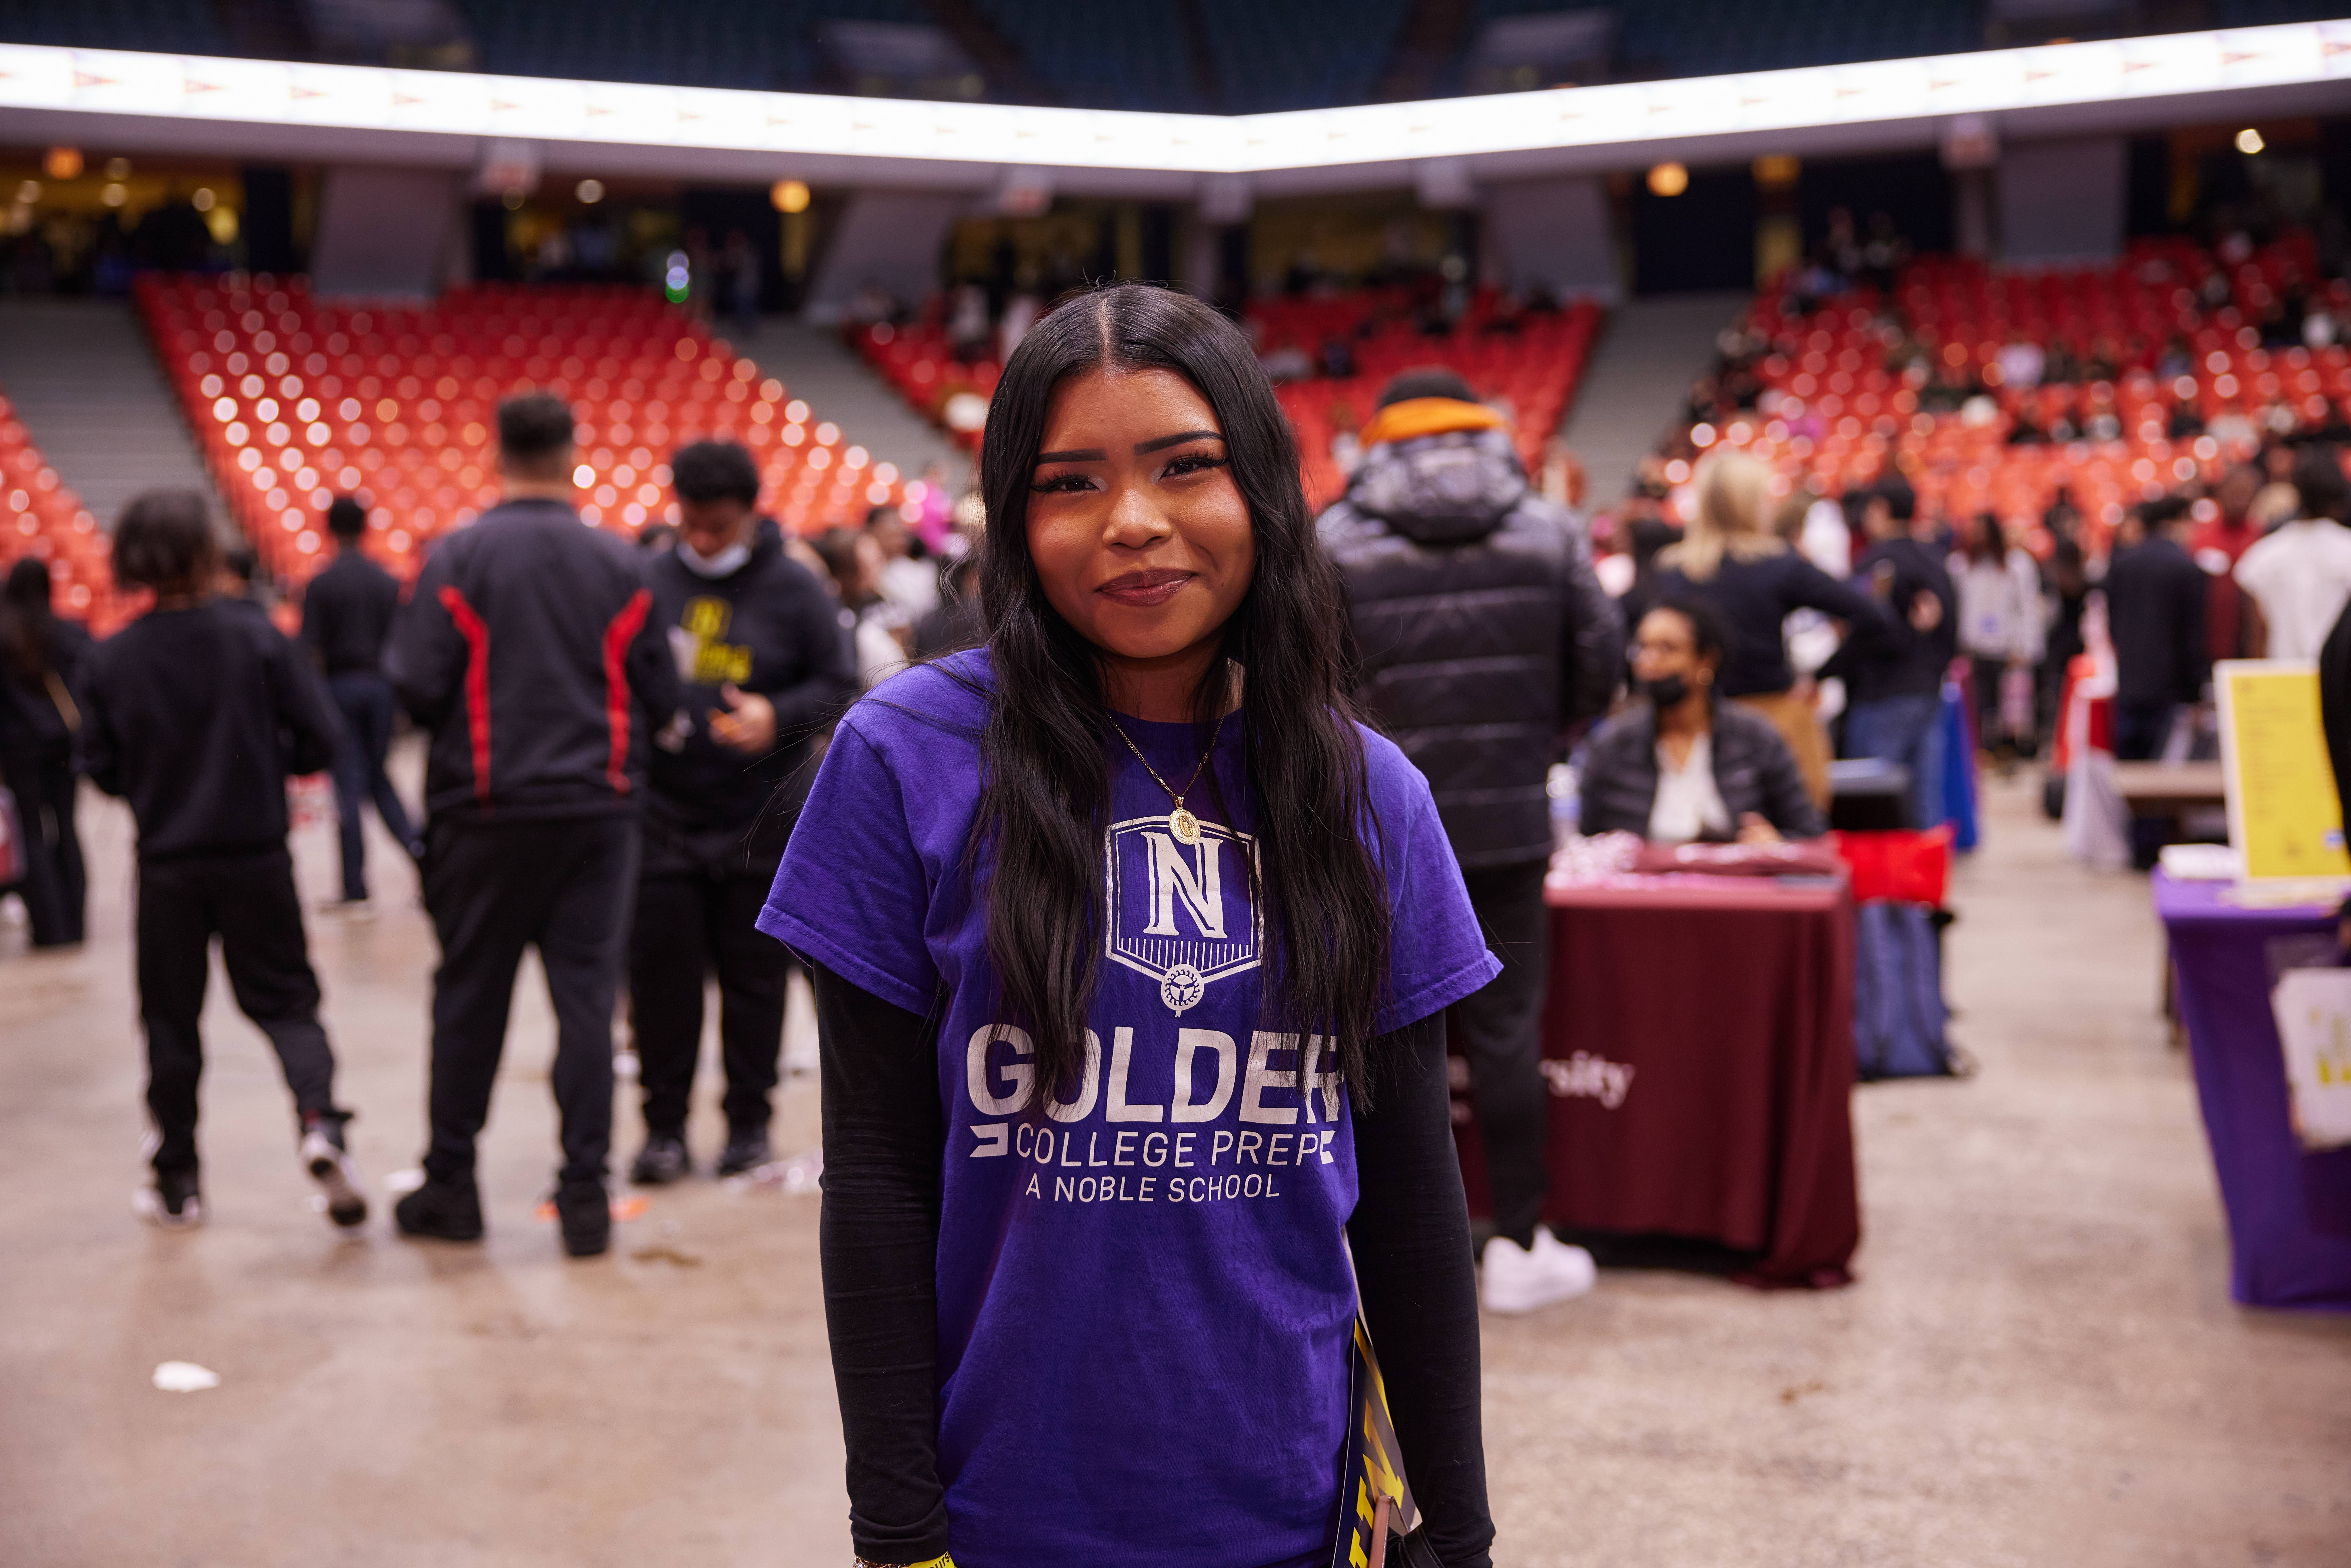 A Golder College Prep junior, Briana L, stands smiling in front of a bunch of college booths and crowd. She is at the Noble Schools' Junior College Fair and is wearing a bright purple Golder t-shirt.